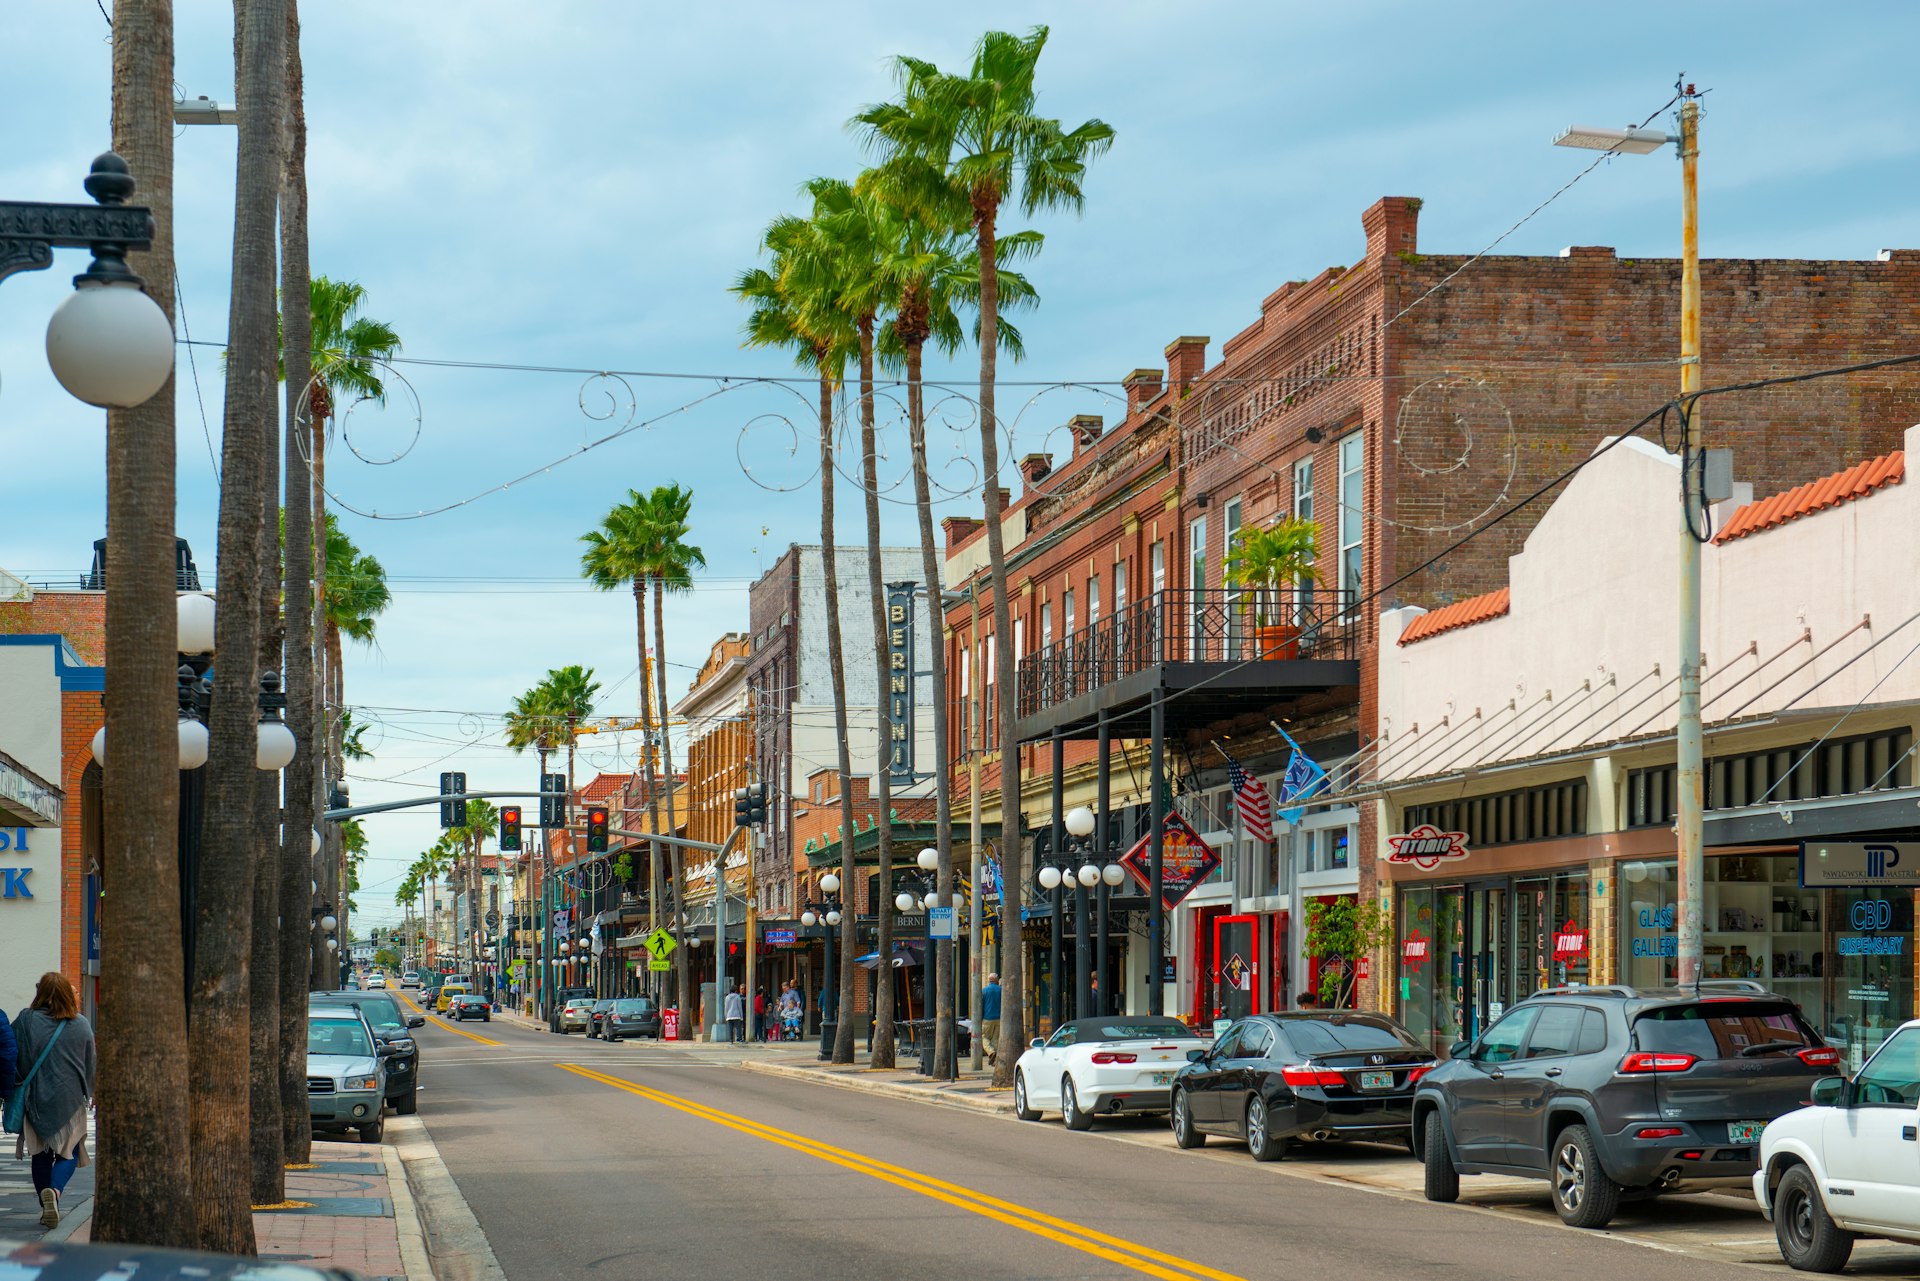 A historic street in Tampa's Ybor City lined with old brick buildings and palm trees